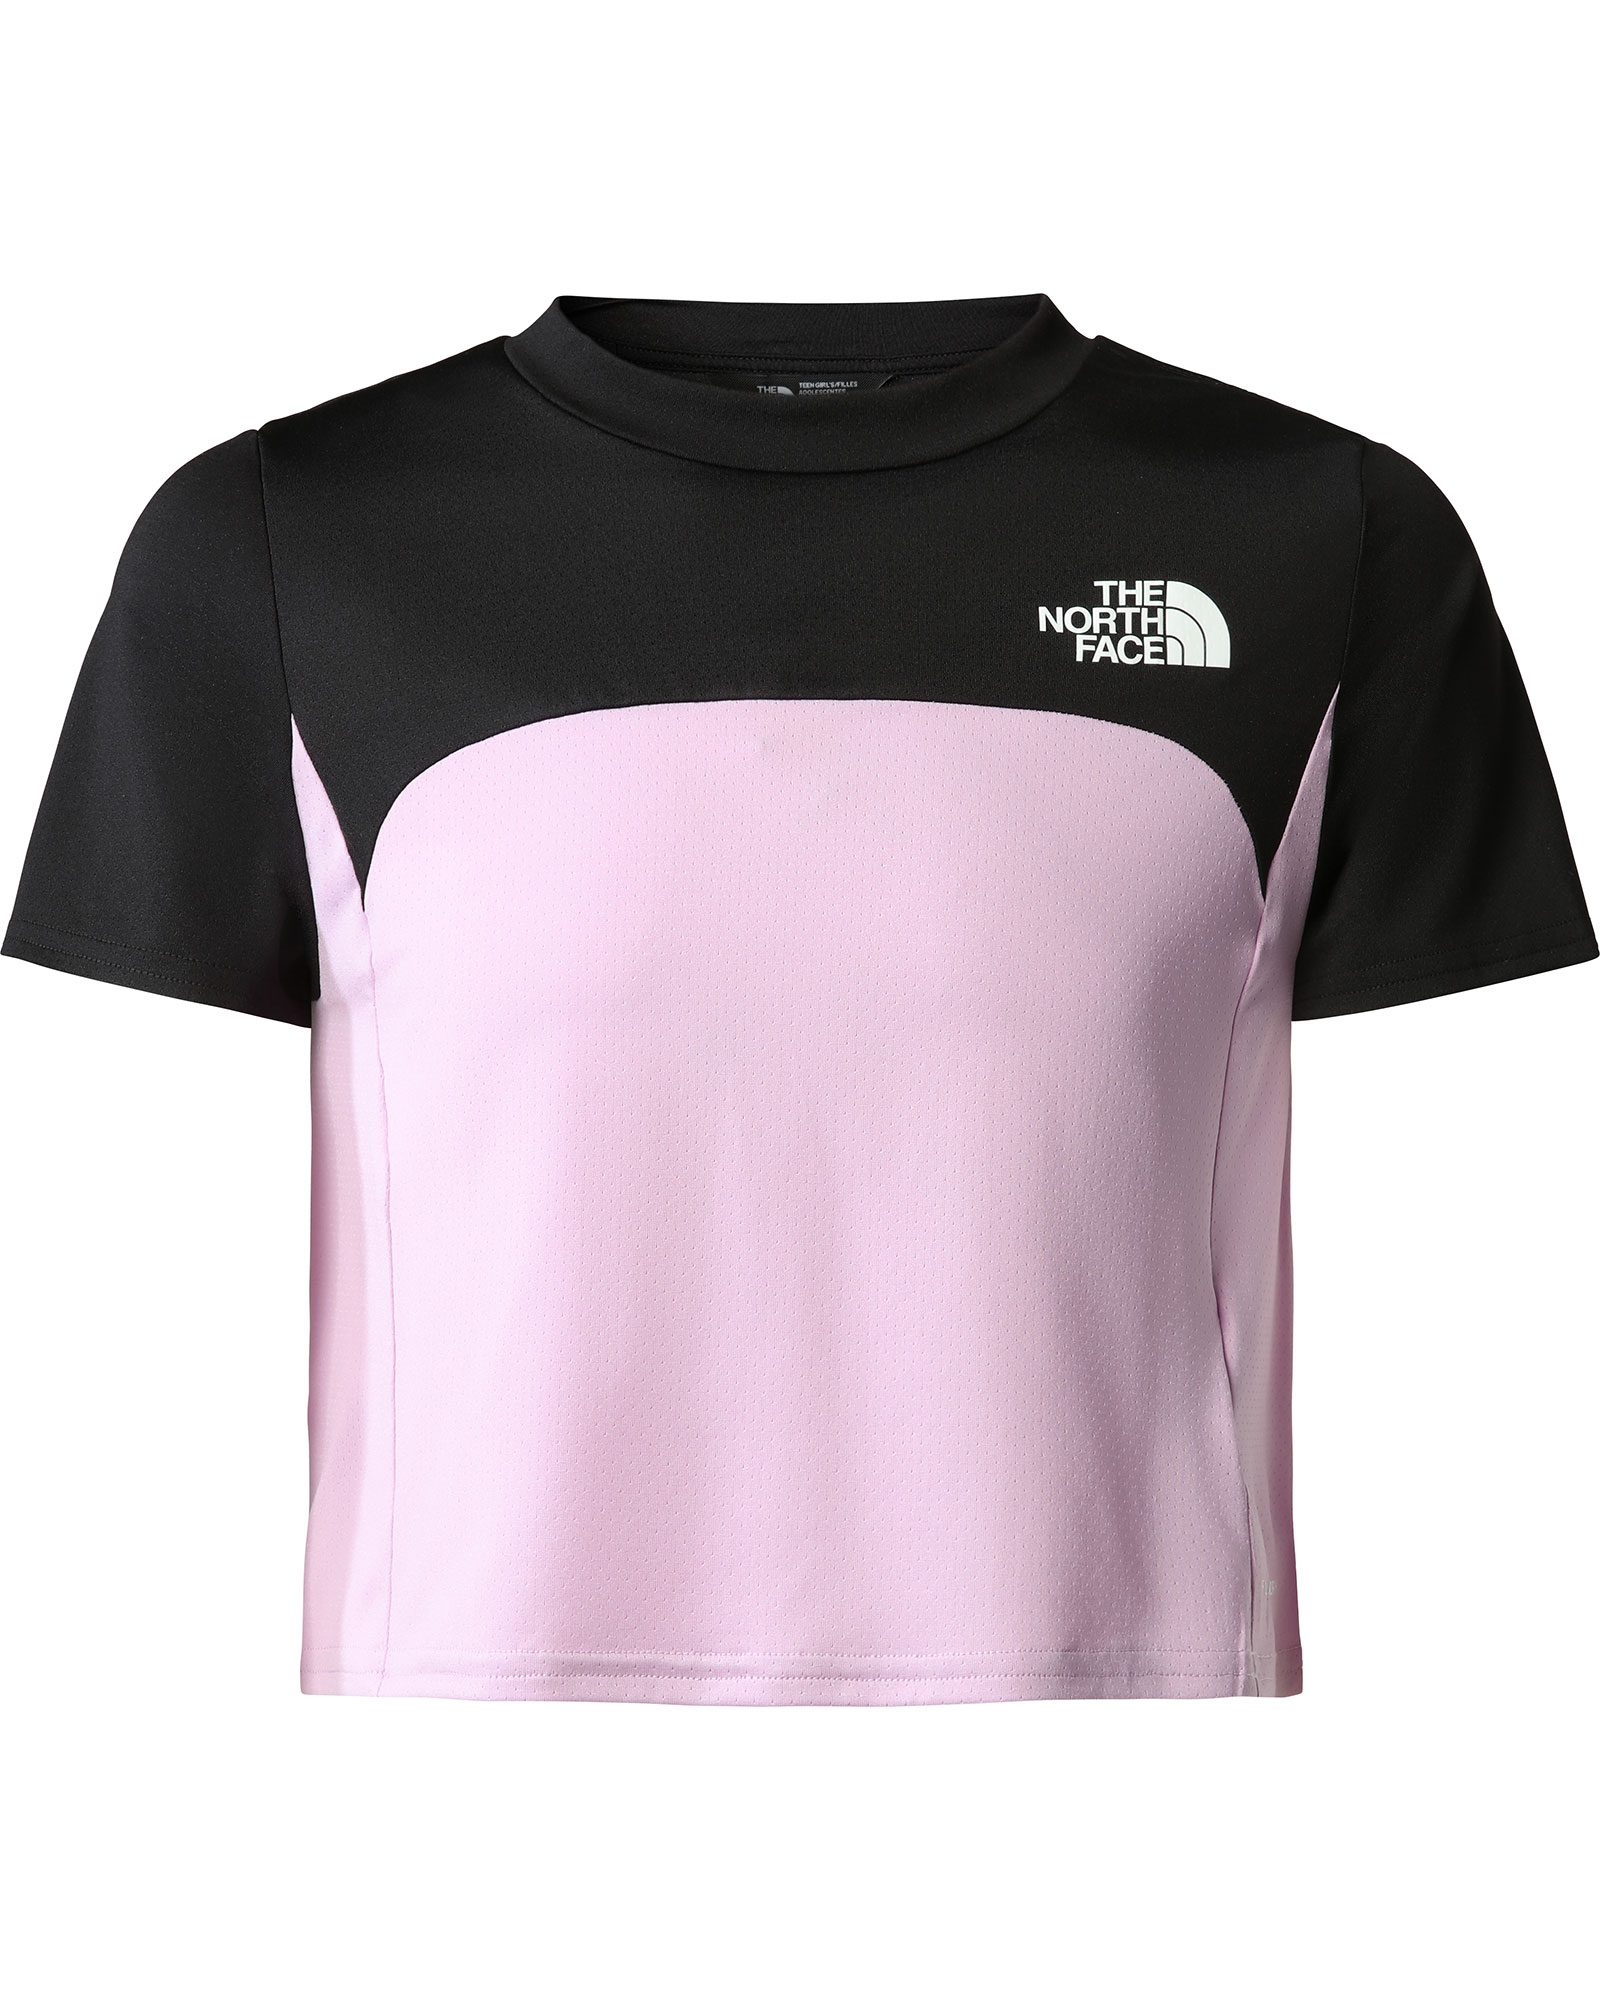 The North Face Girl’s Mountain Athletics T Shirt XL - Lupine XL